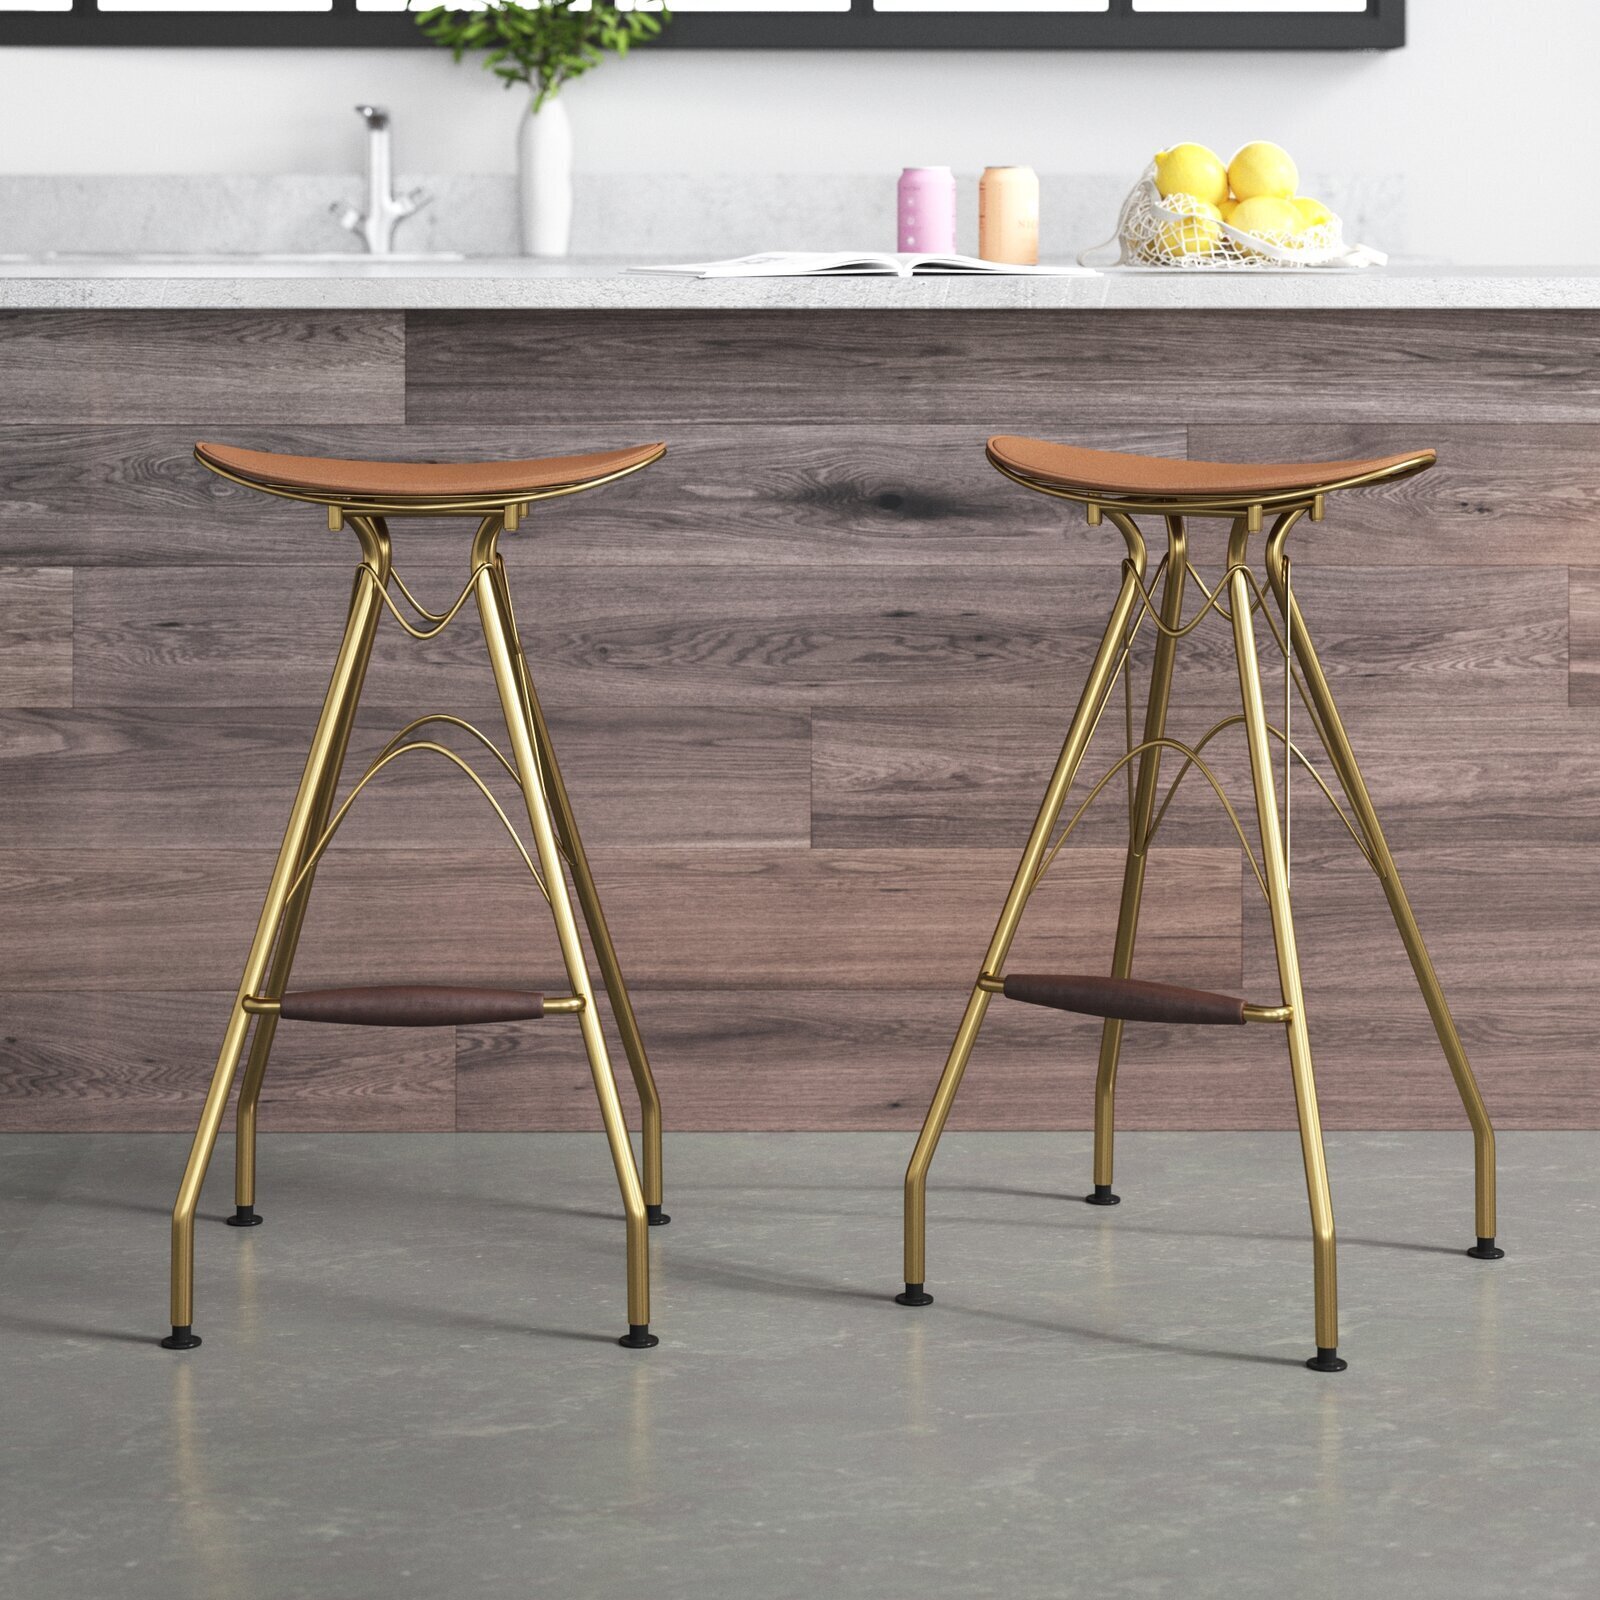 Saddle Stools with Twisted Metal Design